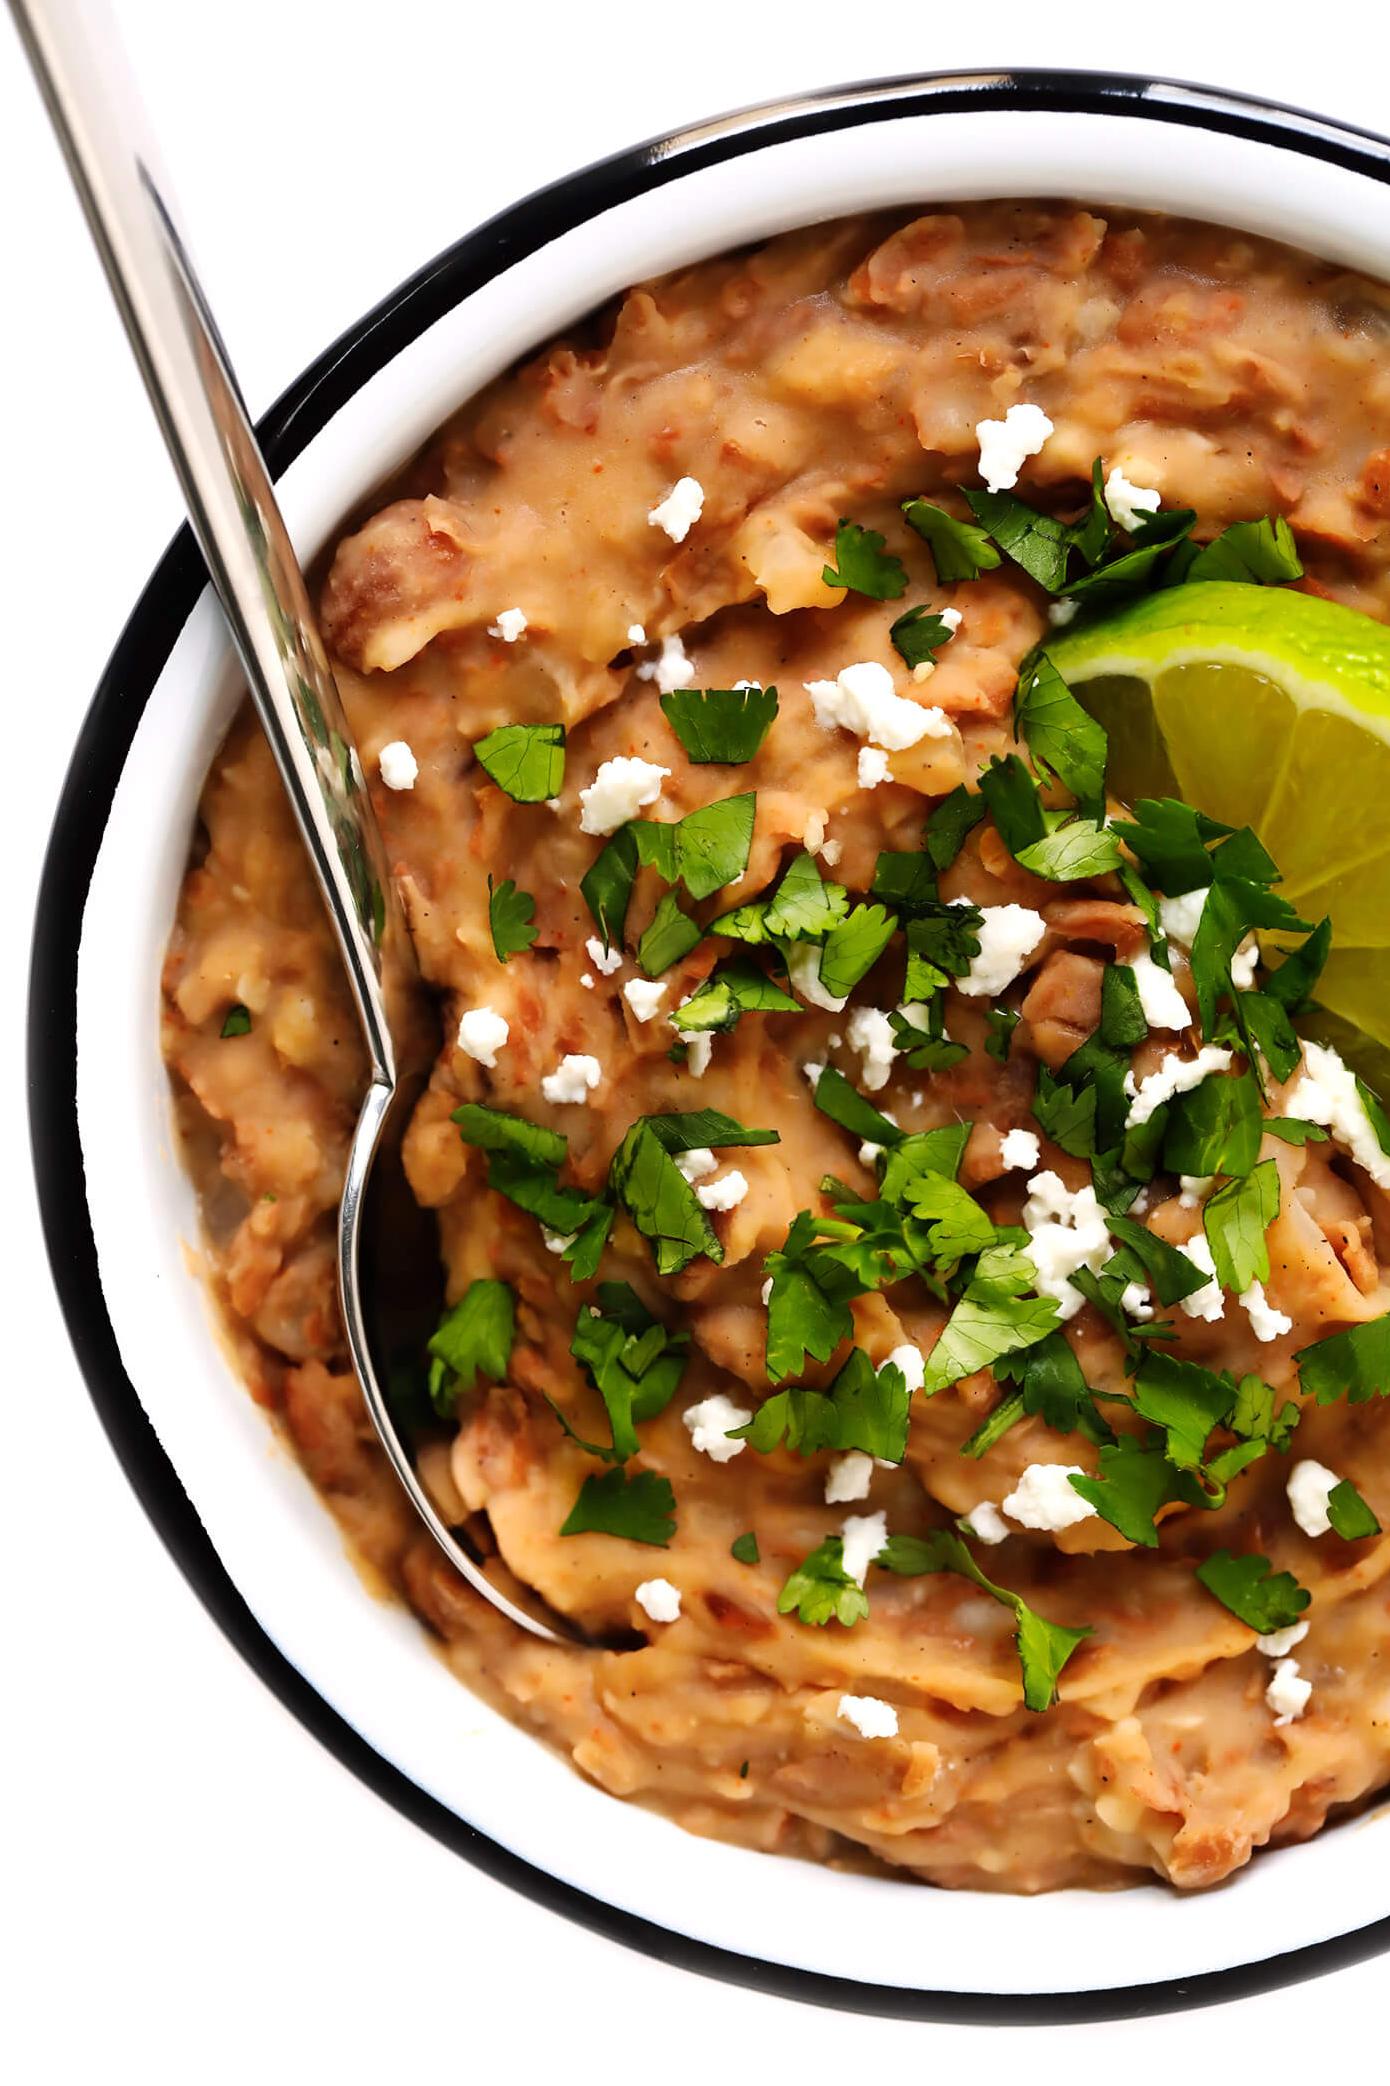  No animals were harmed in the making of these delicious refried beans.